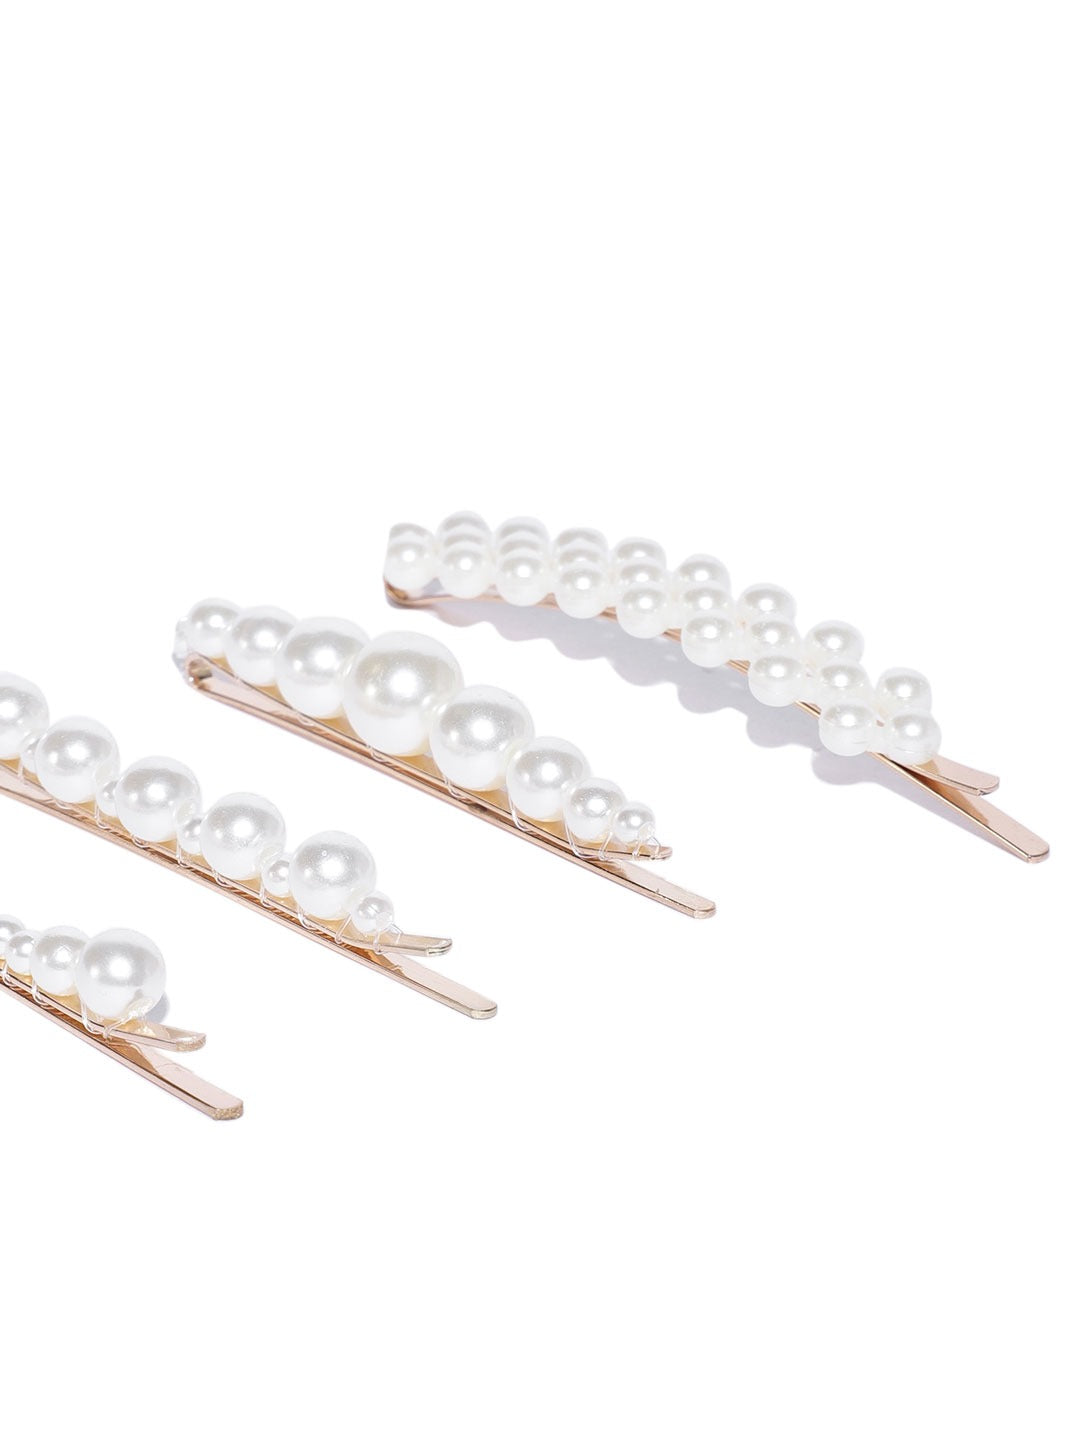 Blueberry set of 4 pearl embellished hair clips